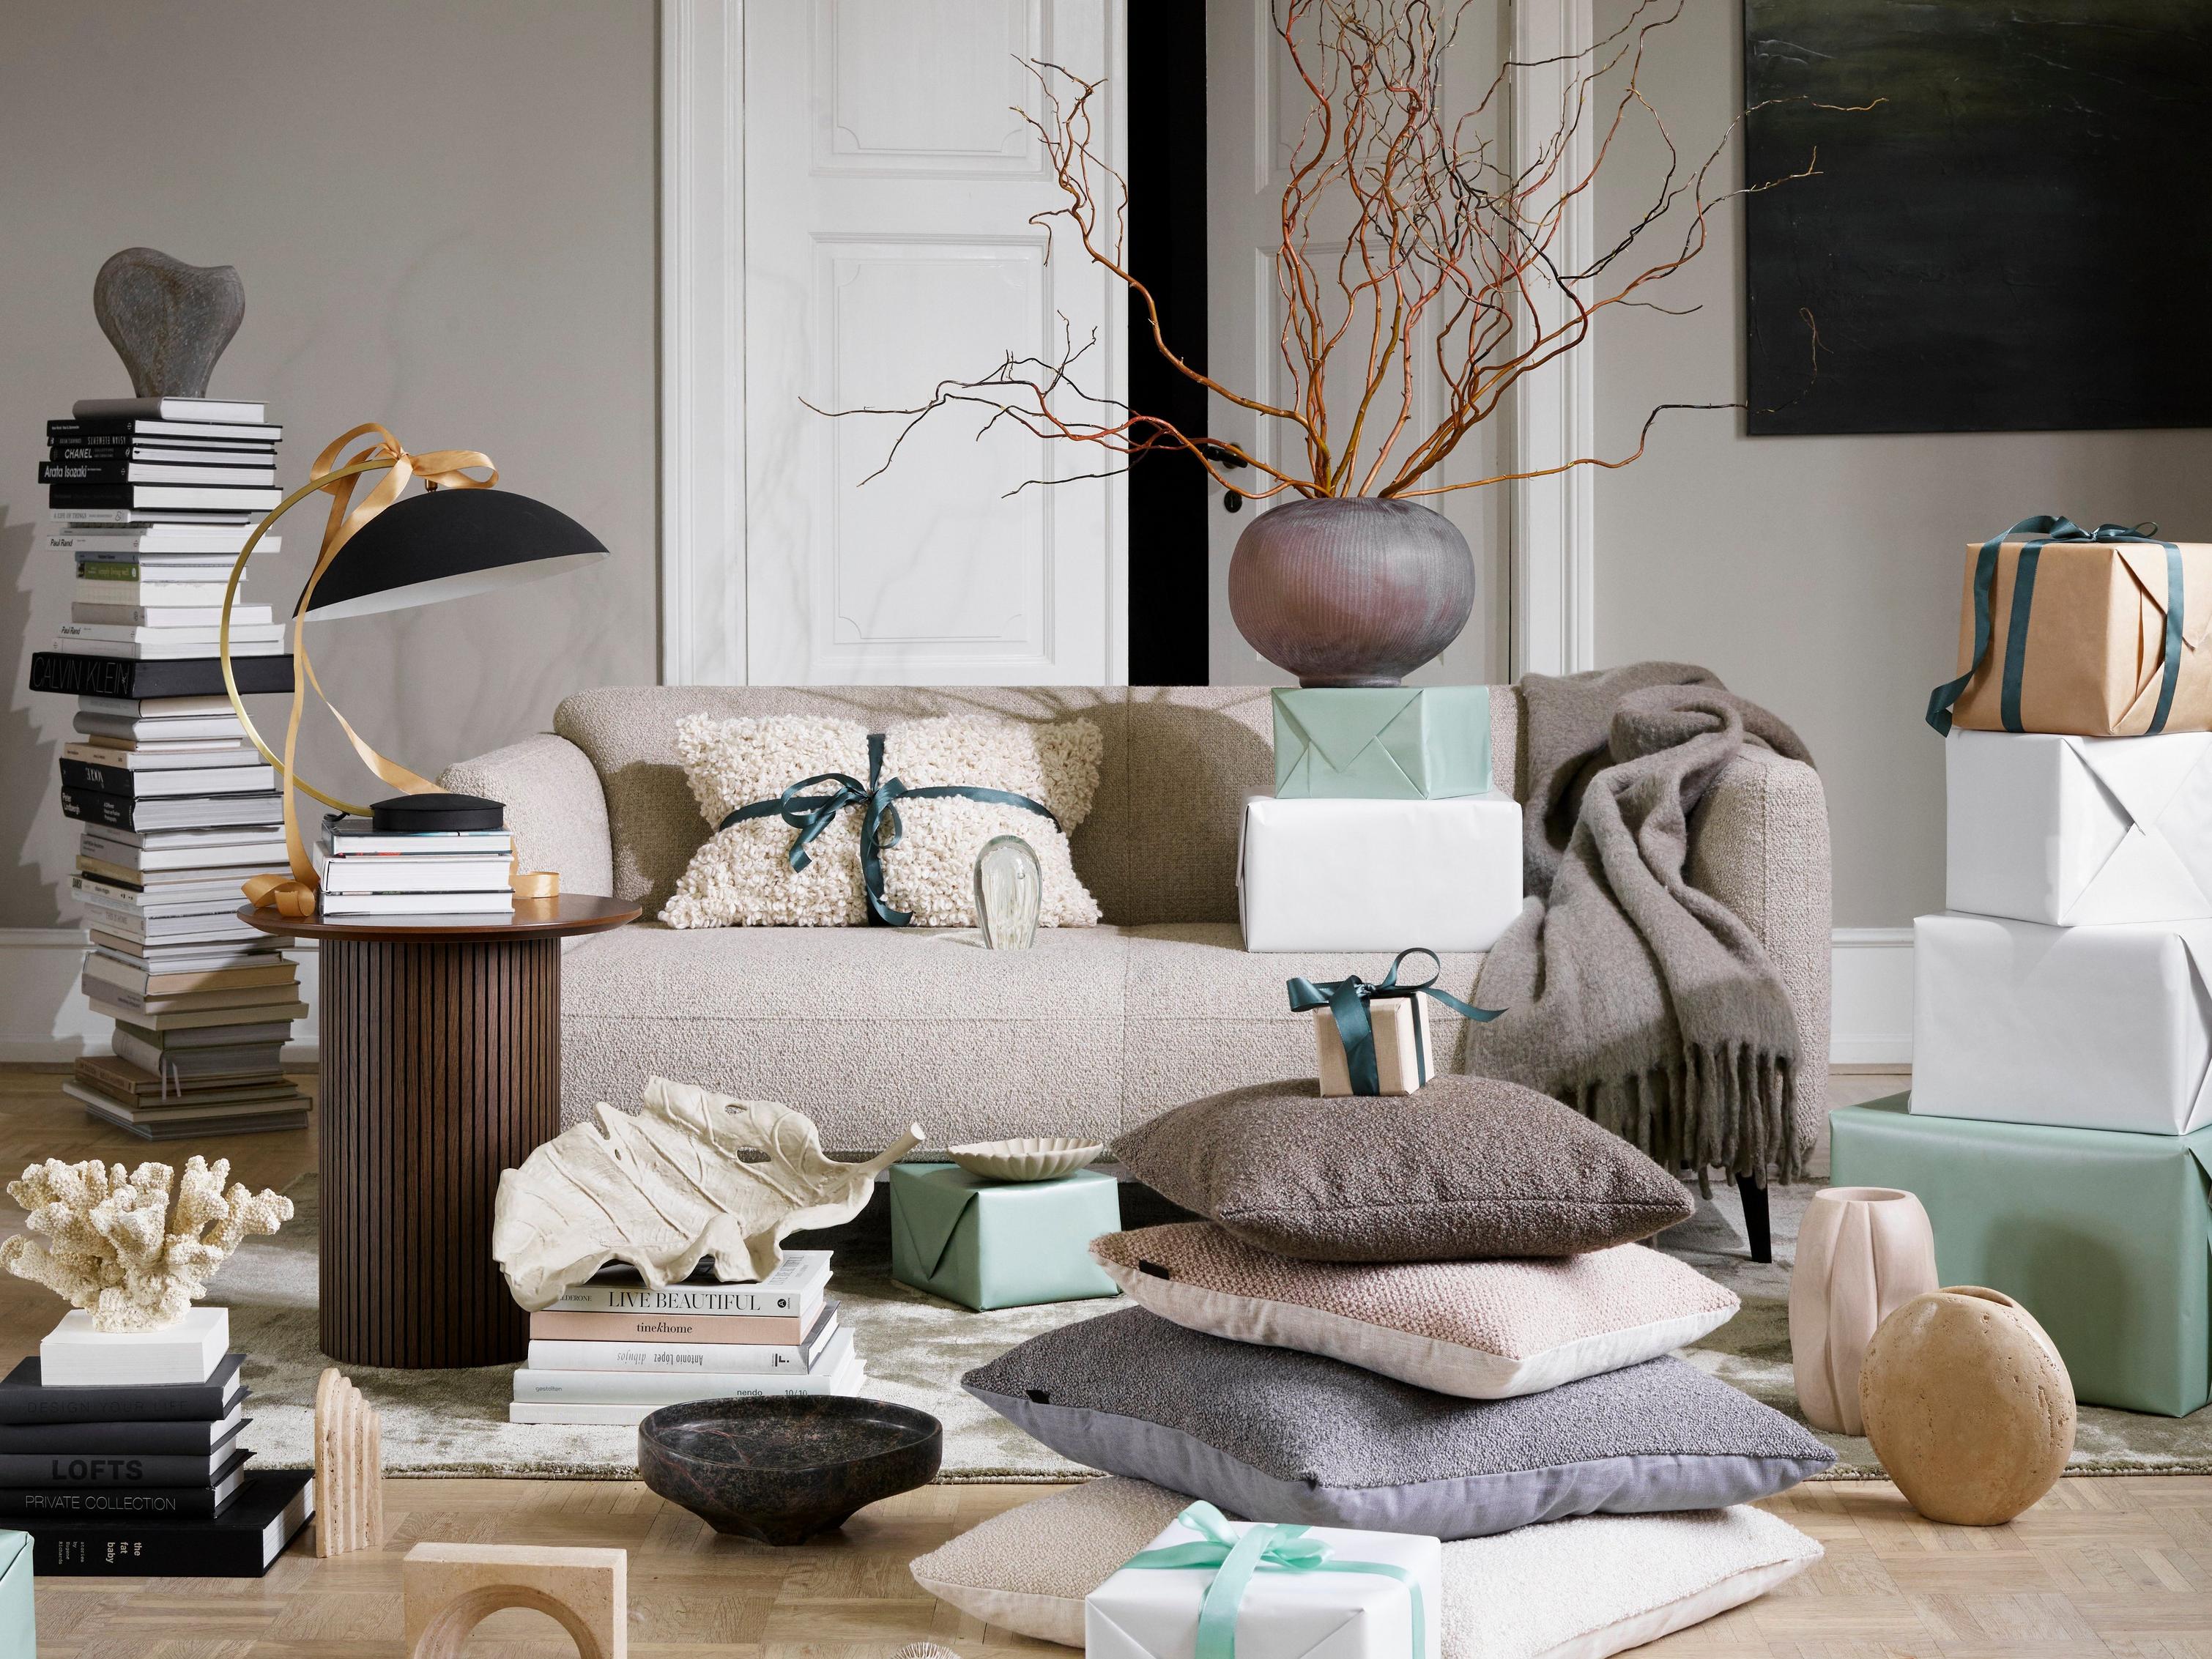 Light and airy living room filled with presents and gifts.